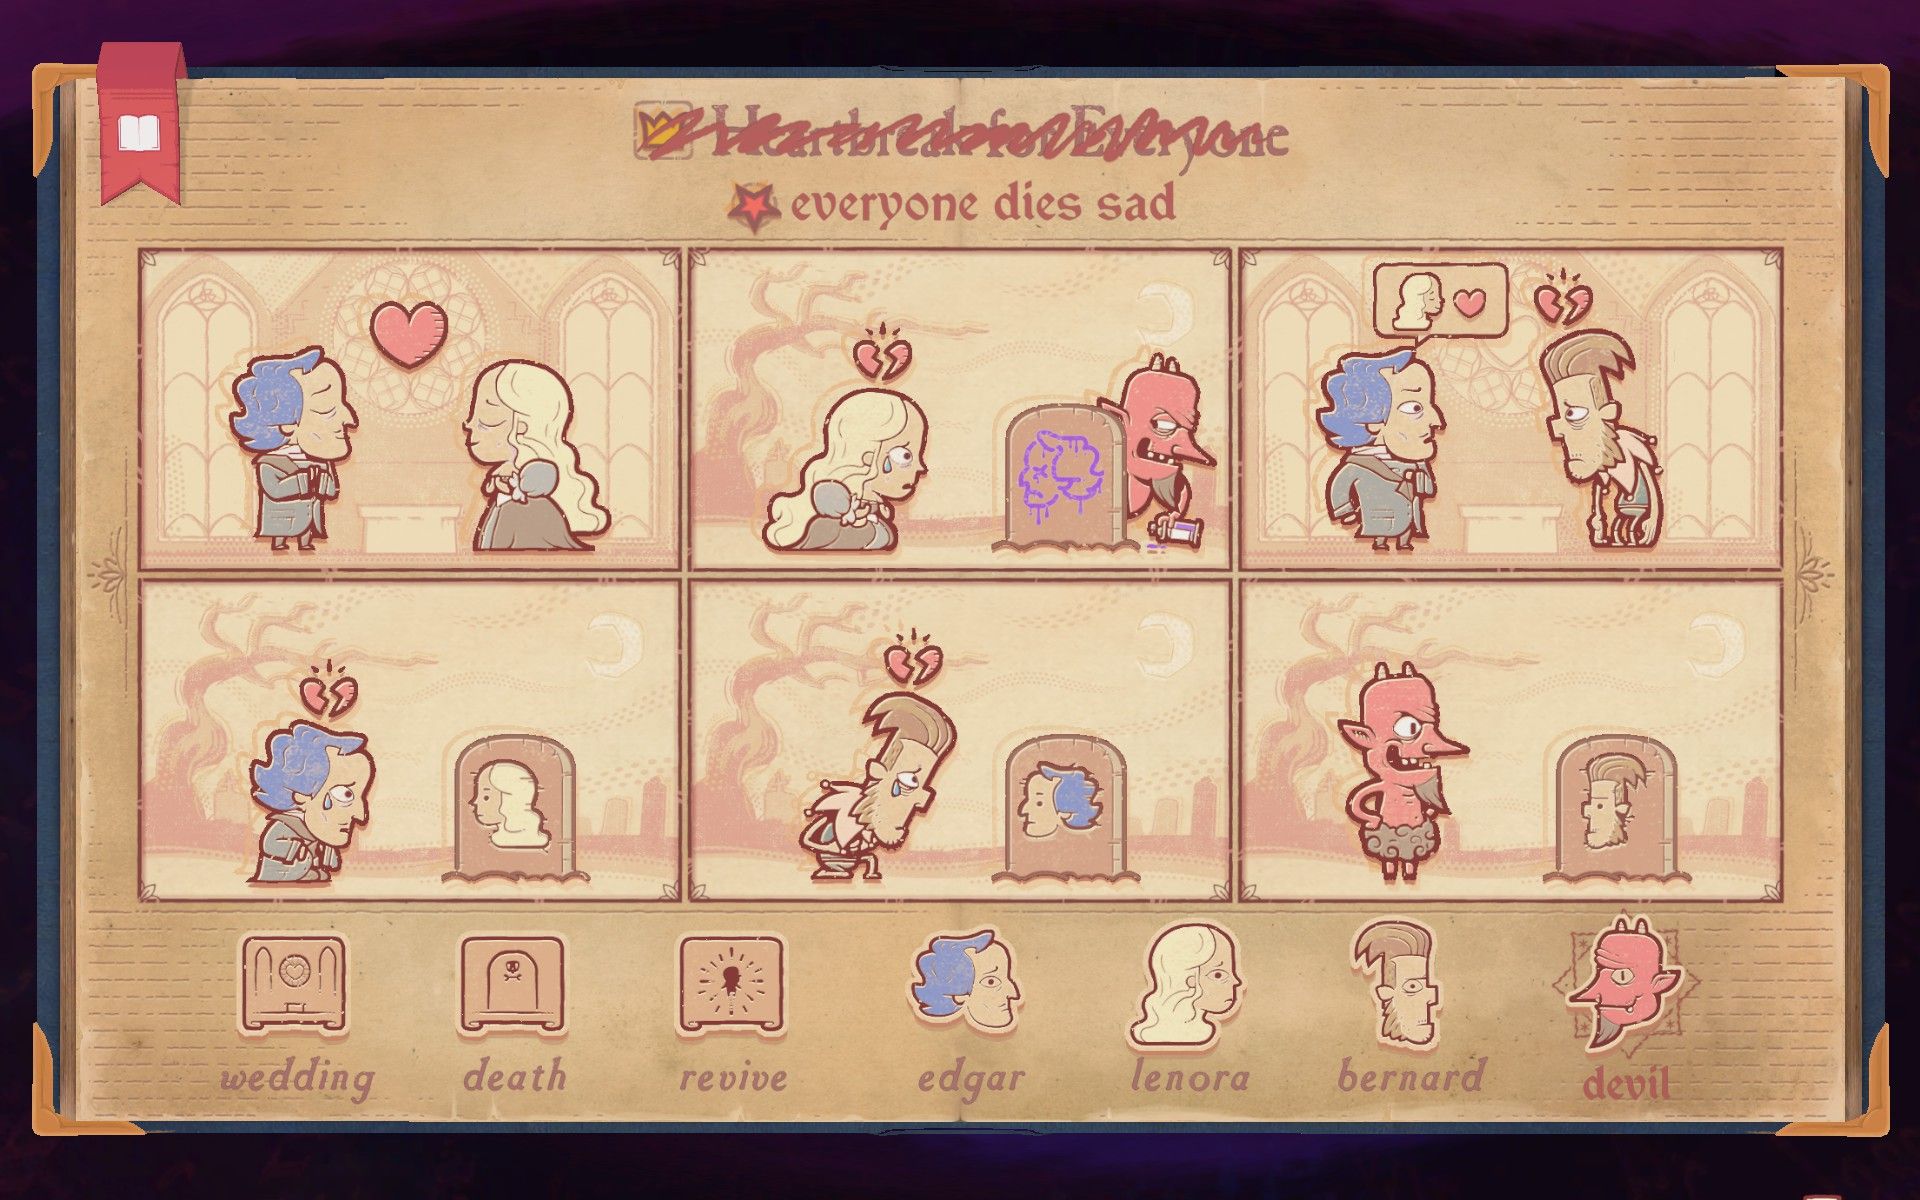 The solution to the devil section of Chapter 3 in Storyteller, showing everyone dying sad.